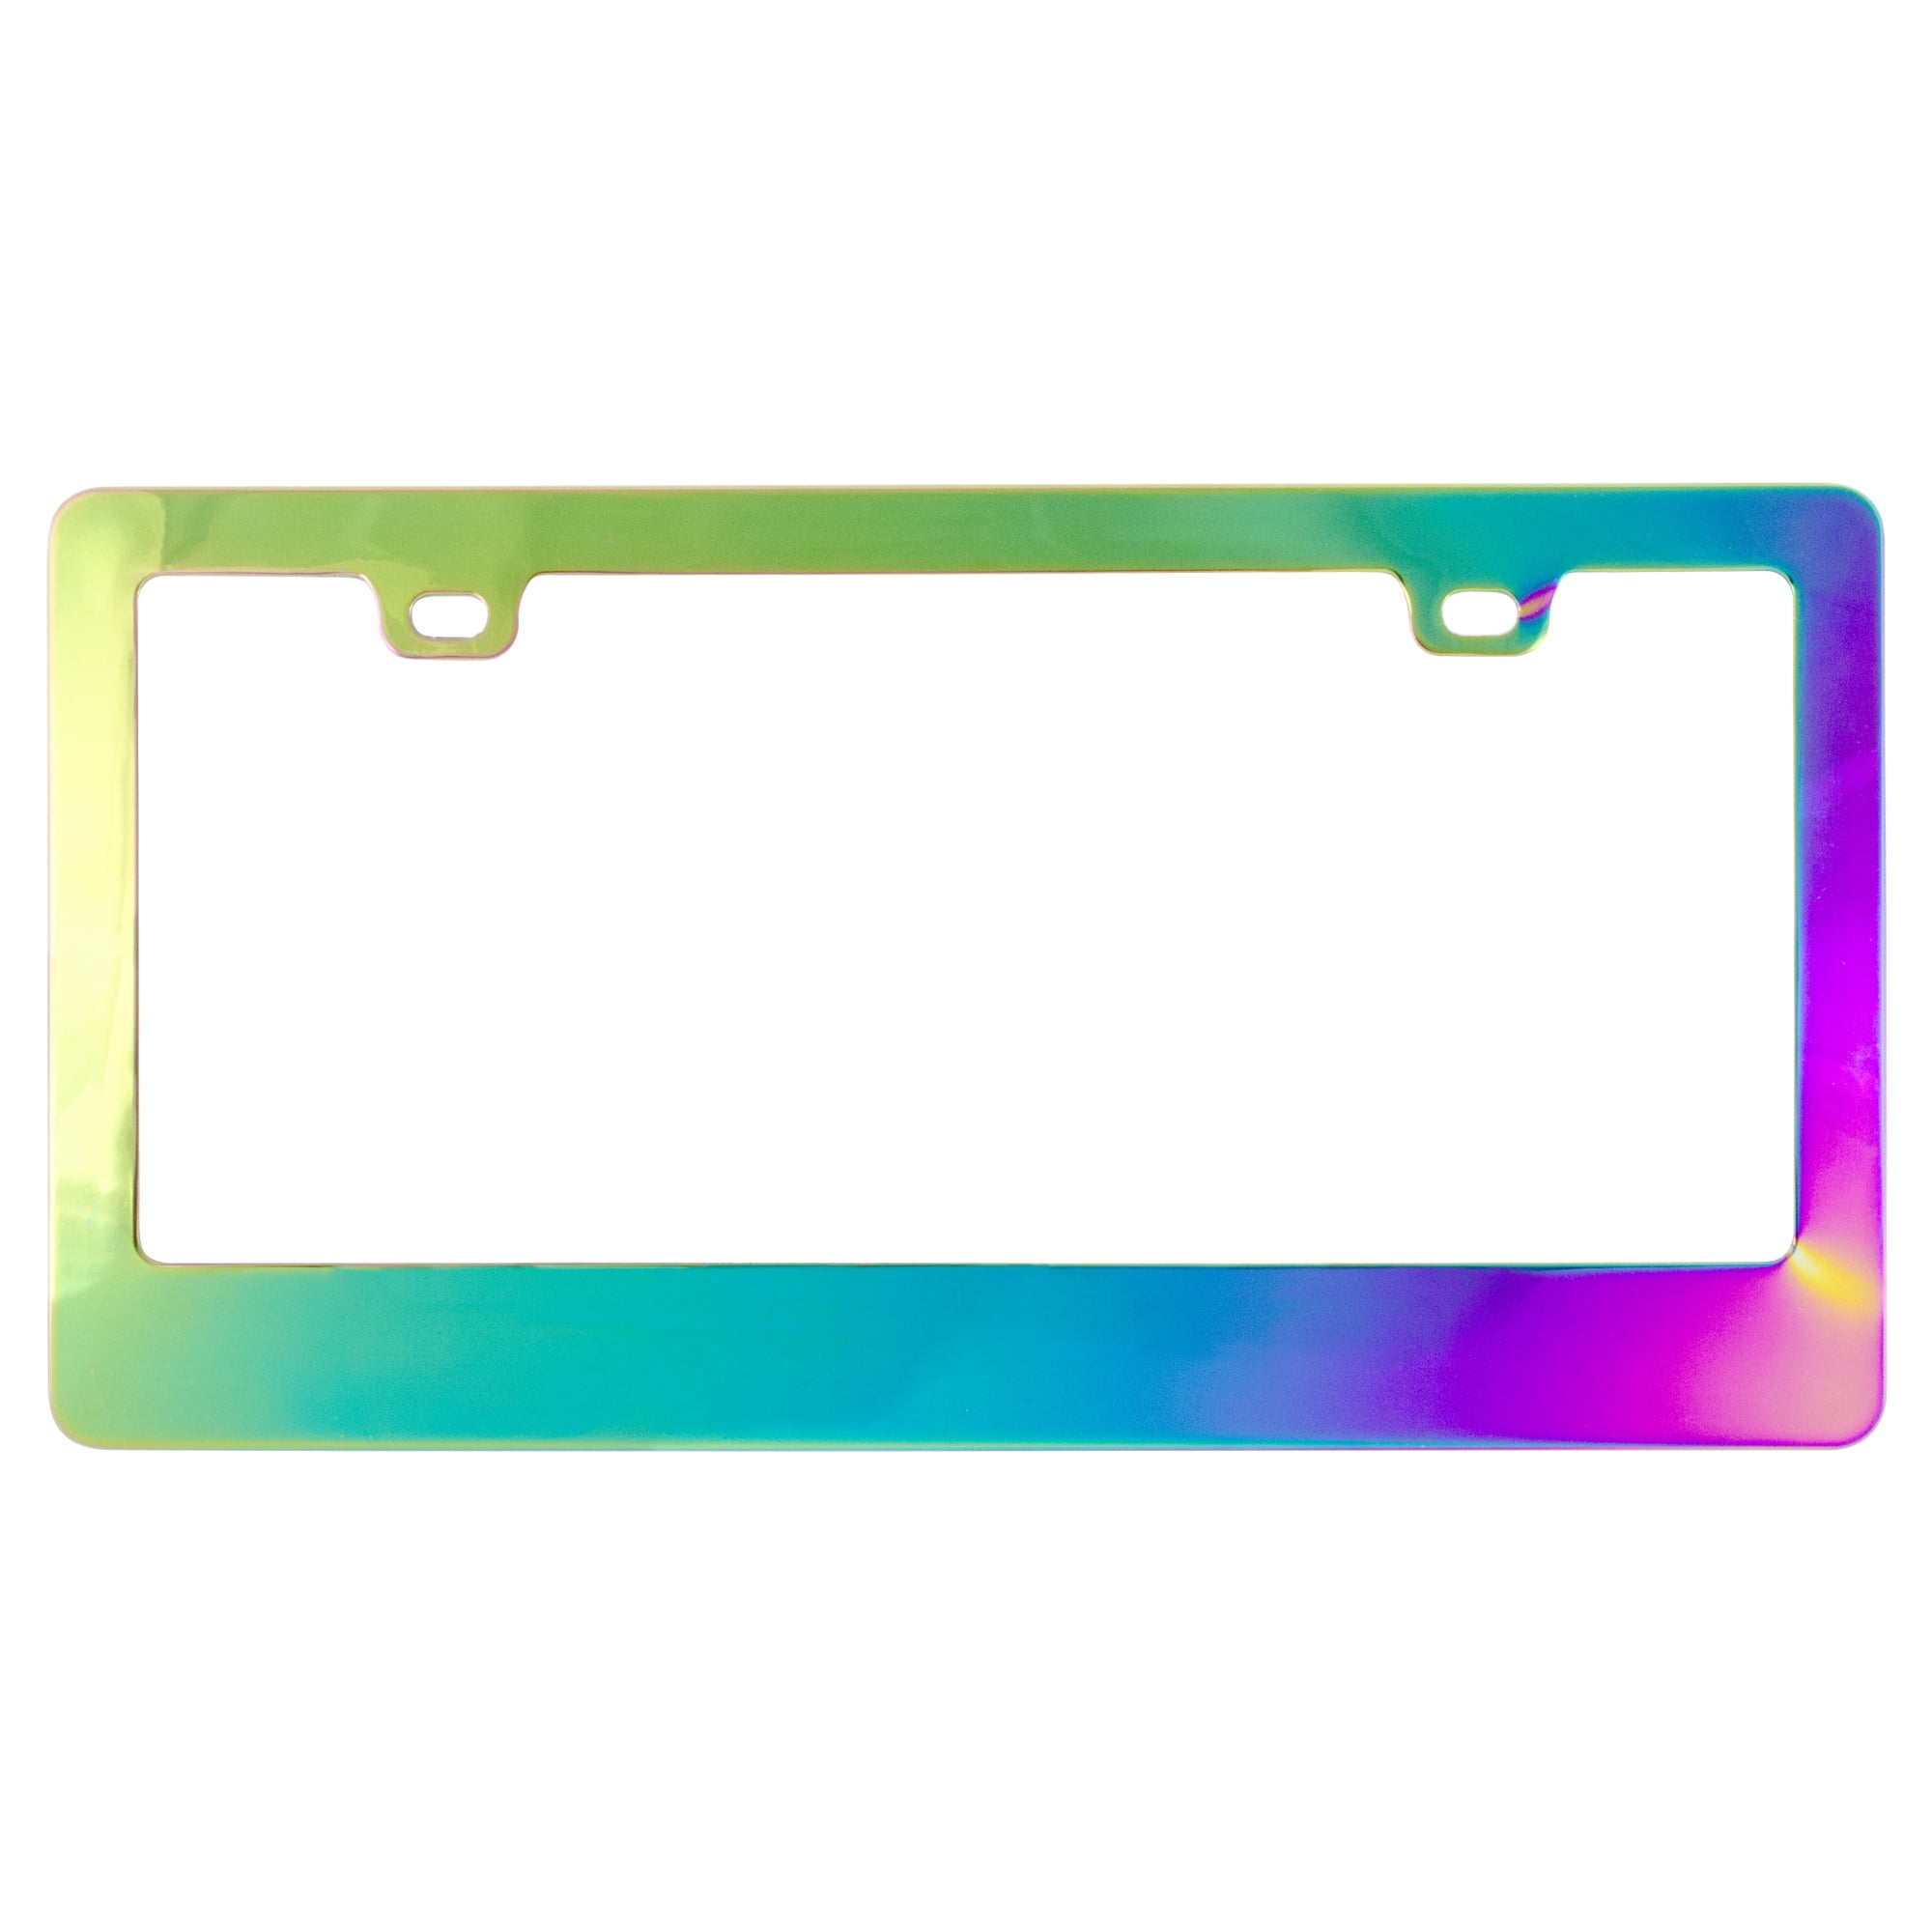 VIP Aluminum Metal License Plate Sign Tag NEW FREE SHIPPING 